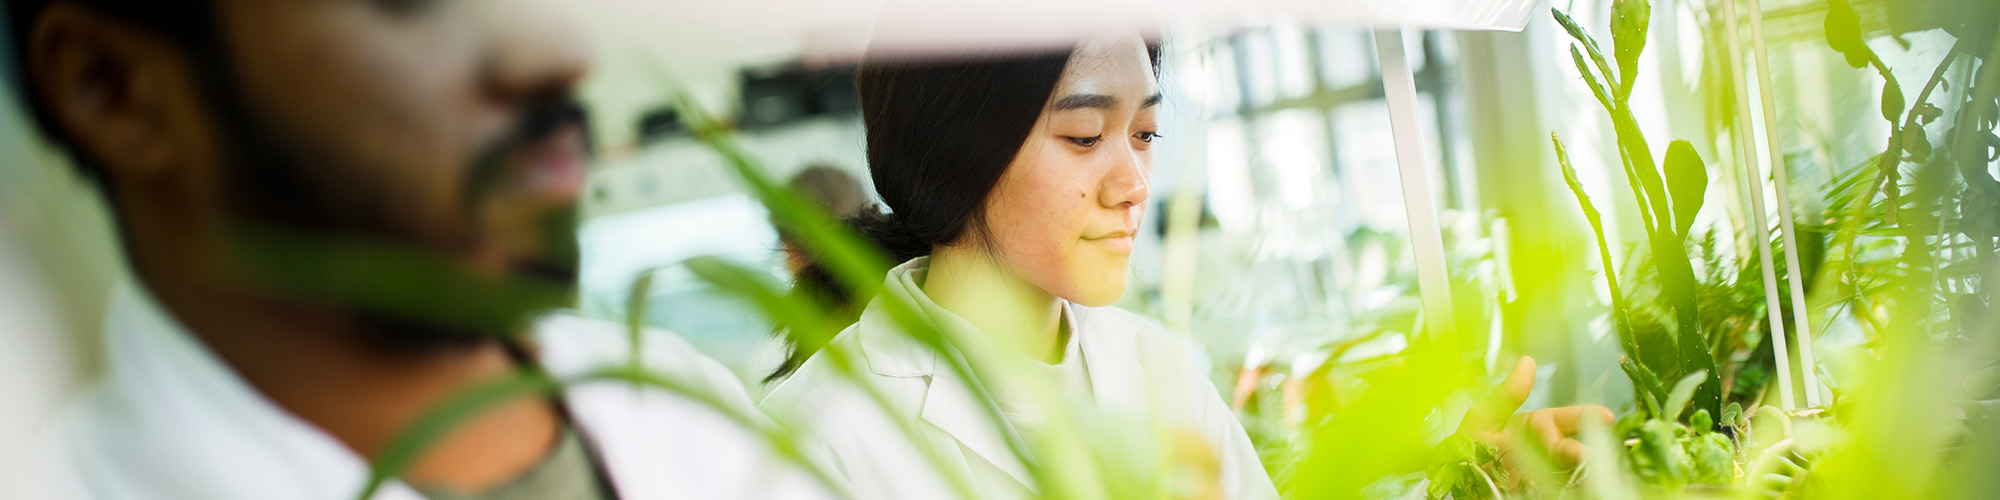 Two students standing in a biology lab behind plants.